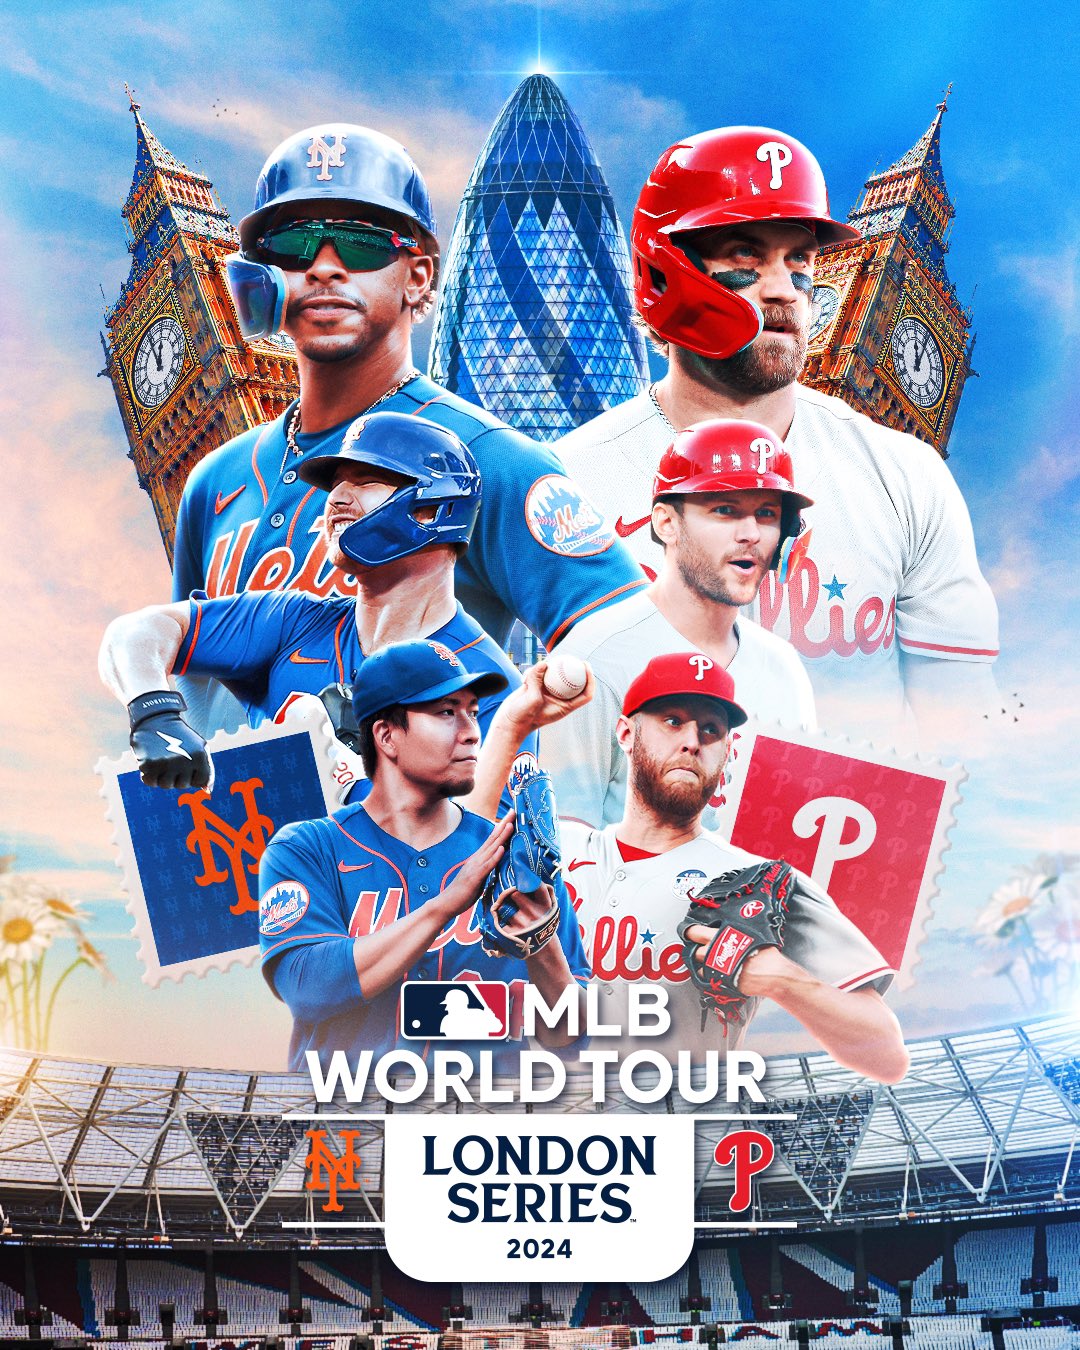 MLB World Tour London Series is back in 2024